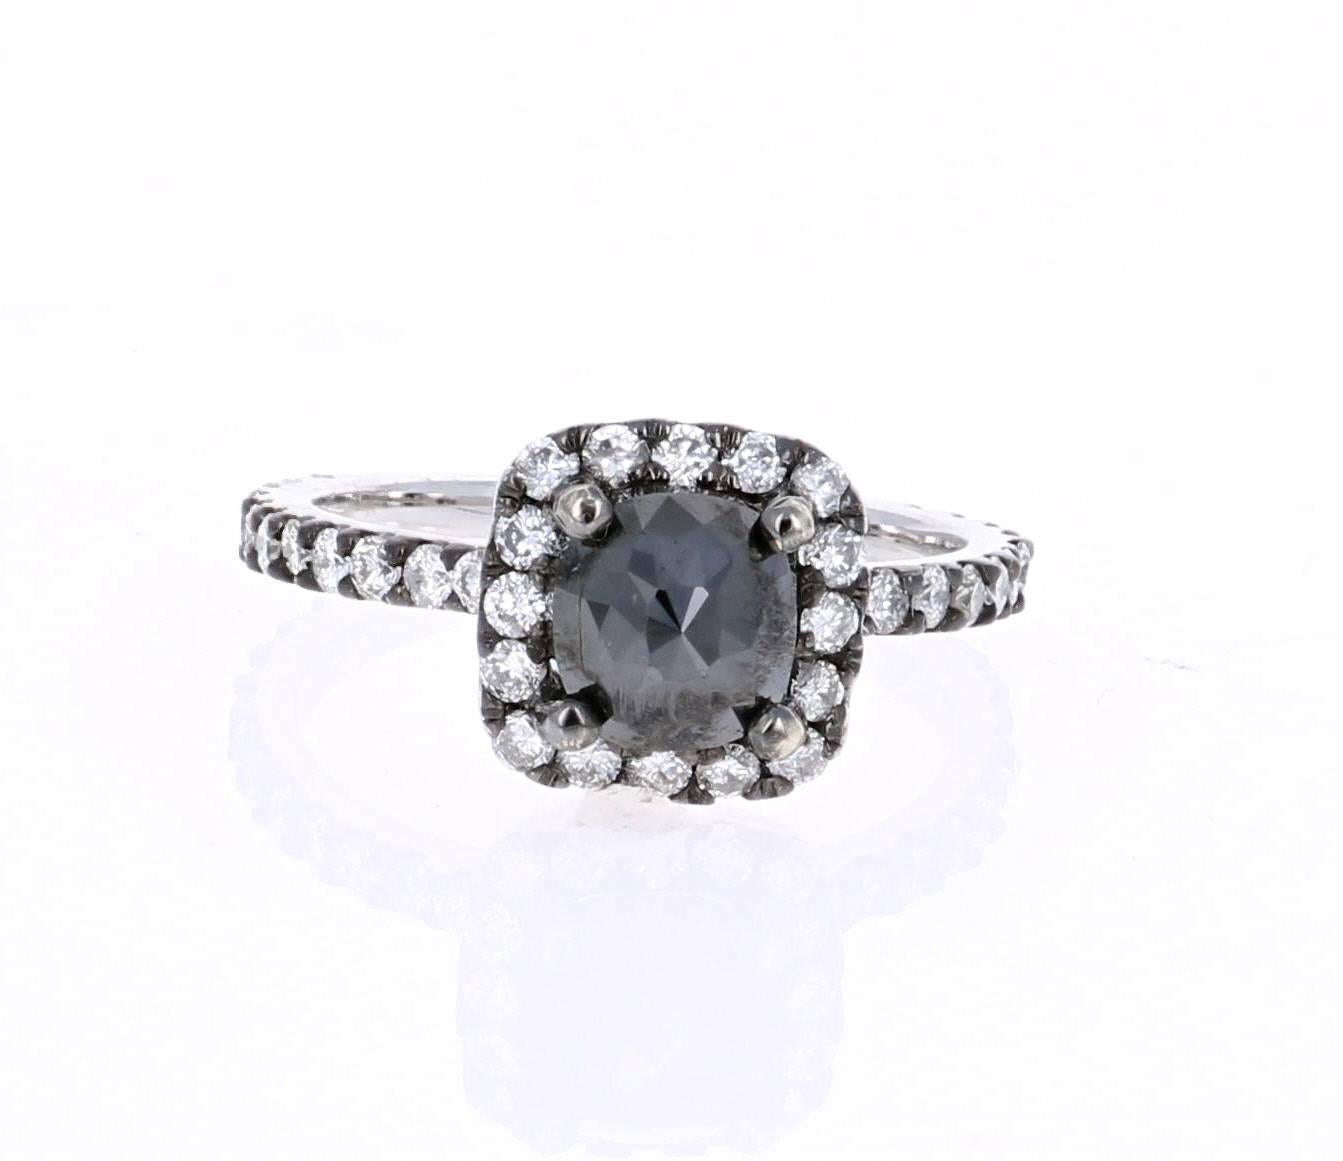 A cute and dainty Black and White Diamond Ring in a Black Rhodium finish for a Vintage-inspired look that can be that special someone's Engagement Ring. This ring has a 1.37 carat Black Diamond in the center of the ring which is surrounded by 38